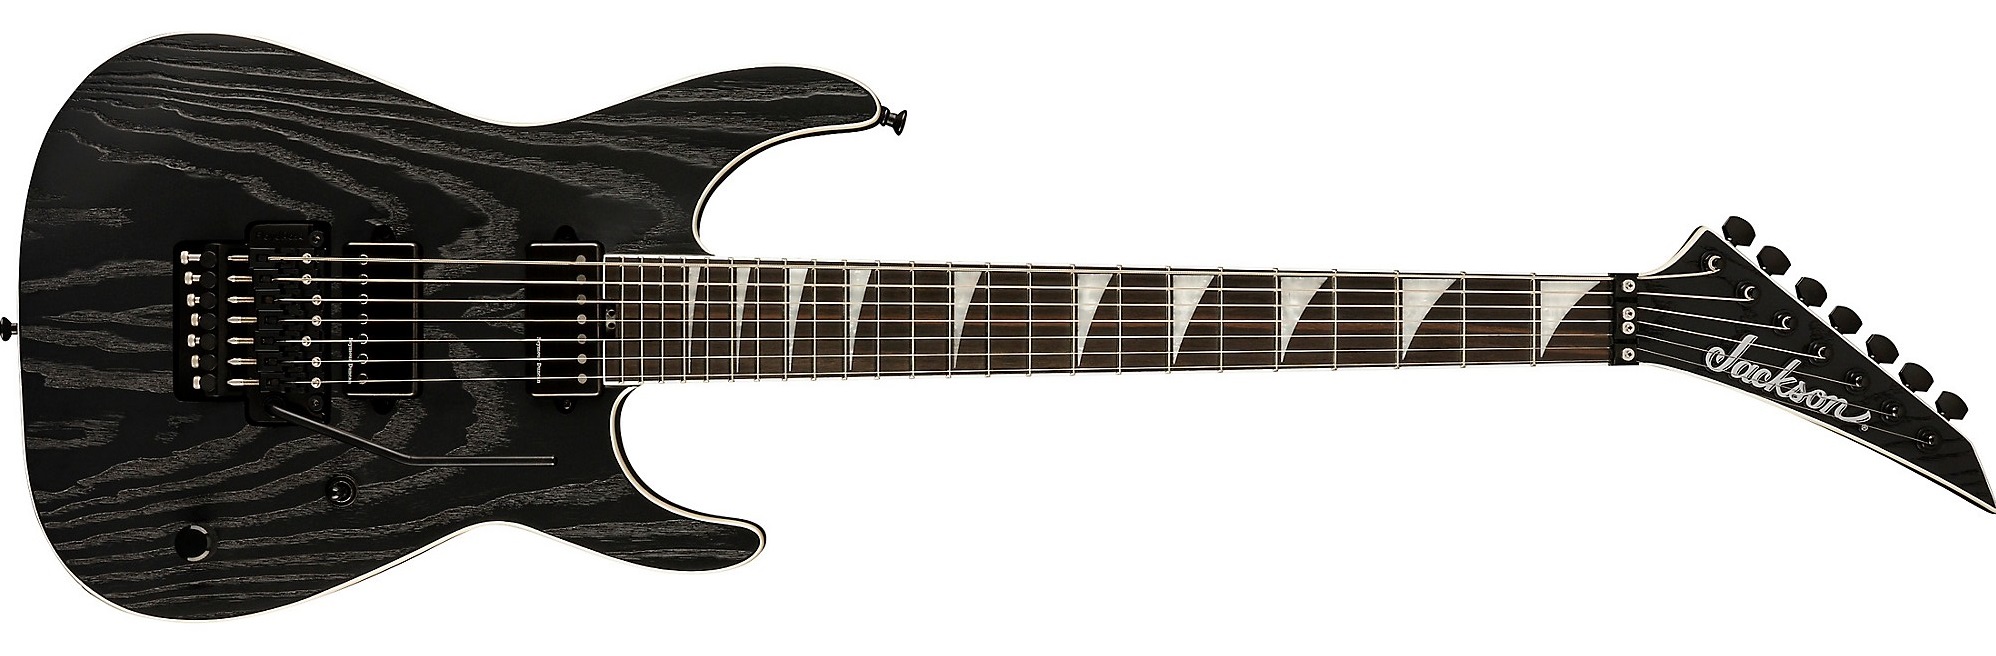 Jackson Pro Series Jeff Loomis Soloist SL7 Electric Guitar on a white background